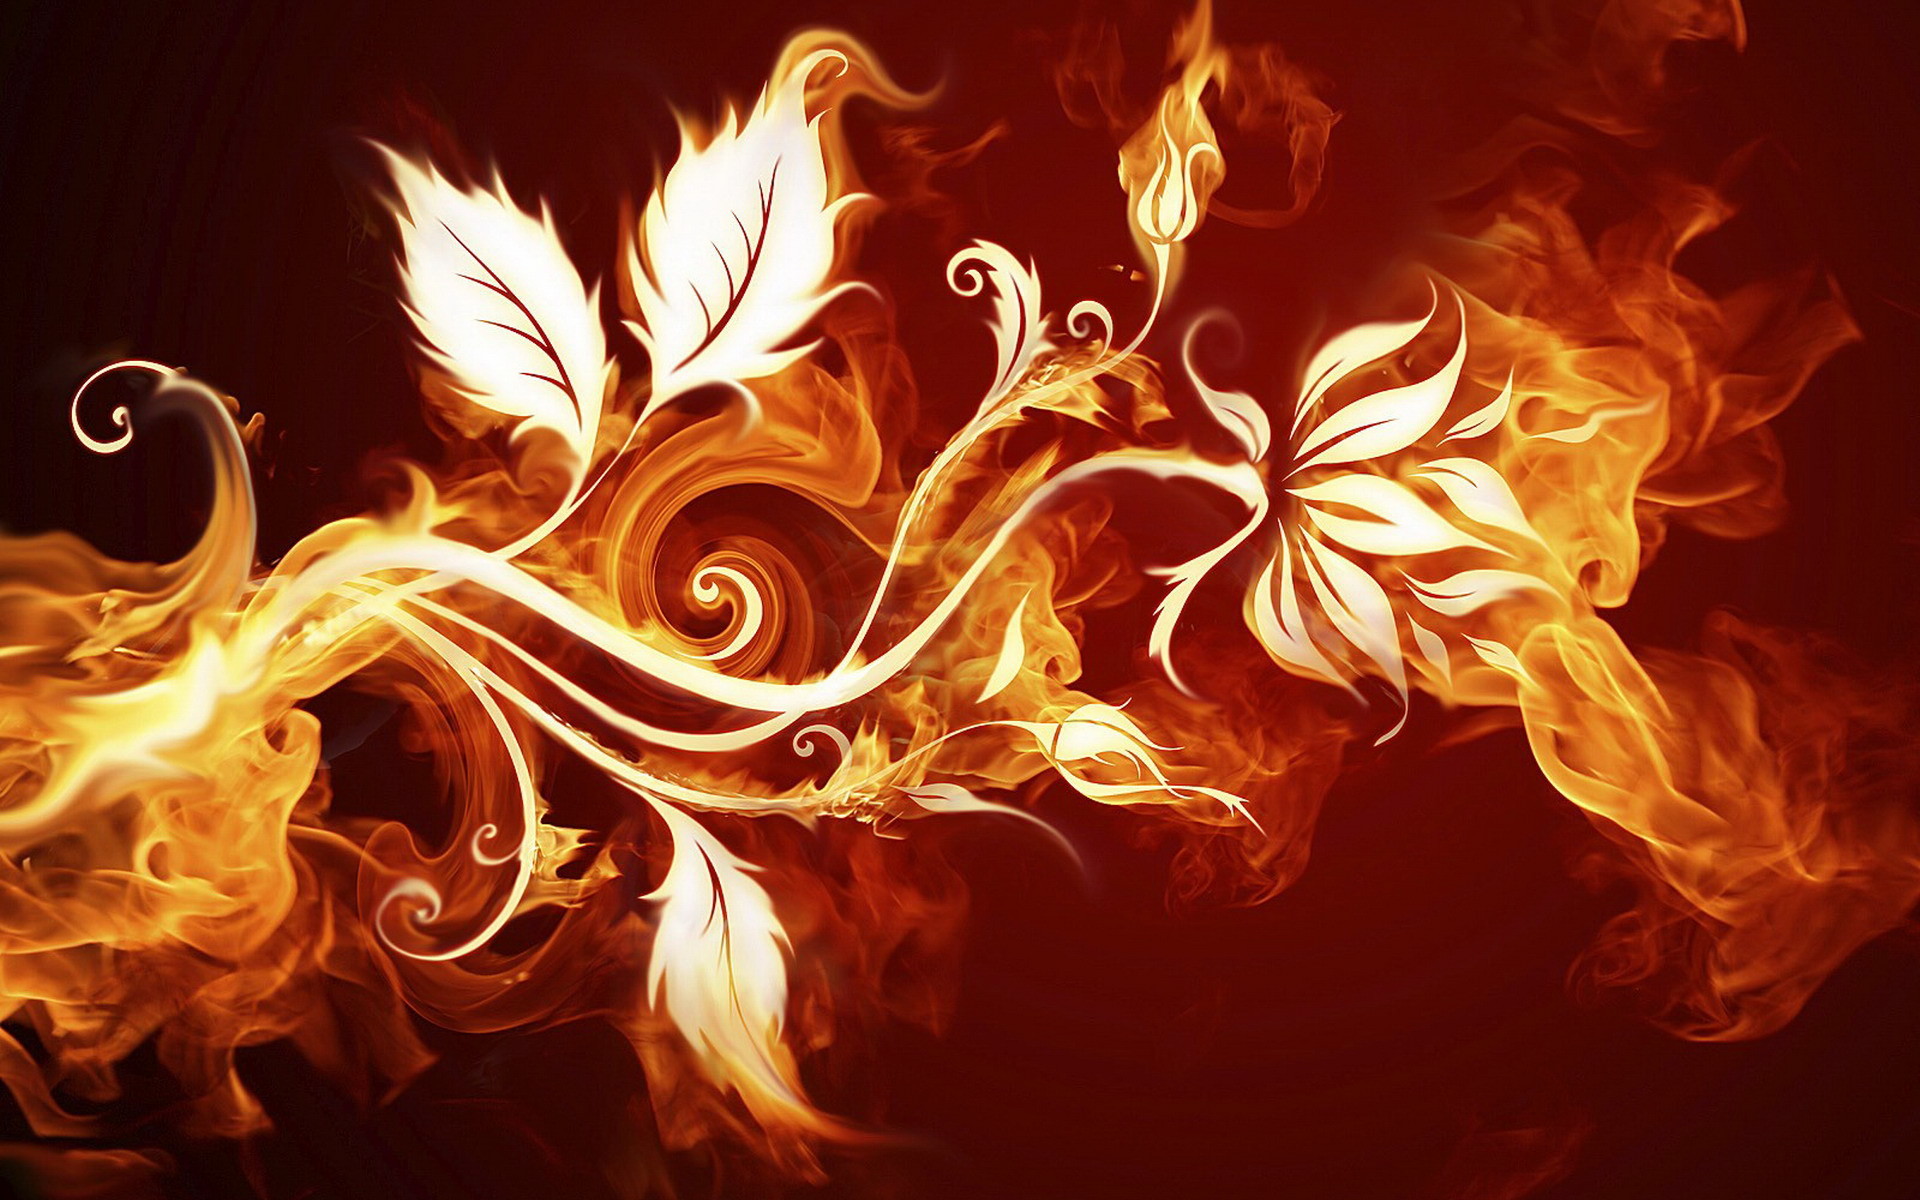 1920x1200 abstract fire leaves and flowers wallpaper for desktop hd desktop wallpapers  amazing download apple background wallpapers